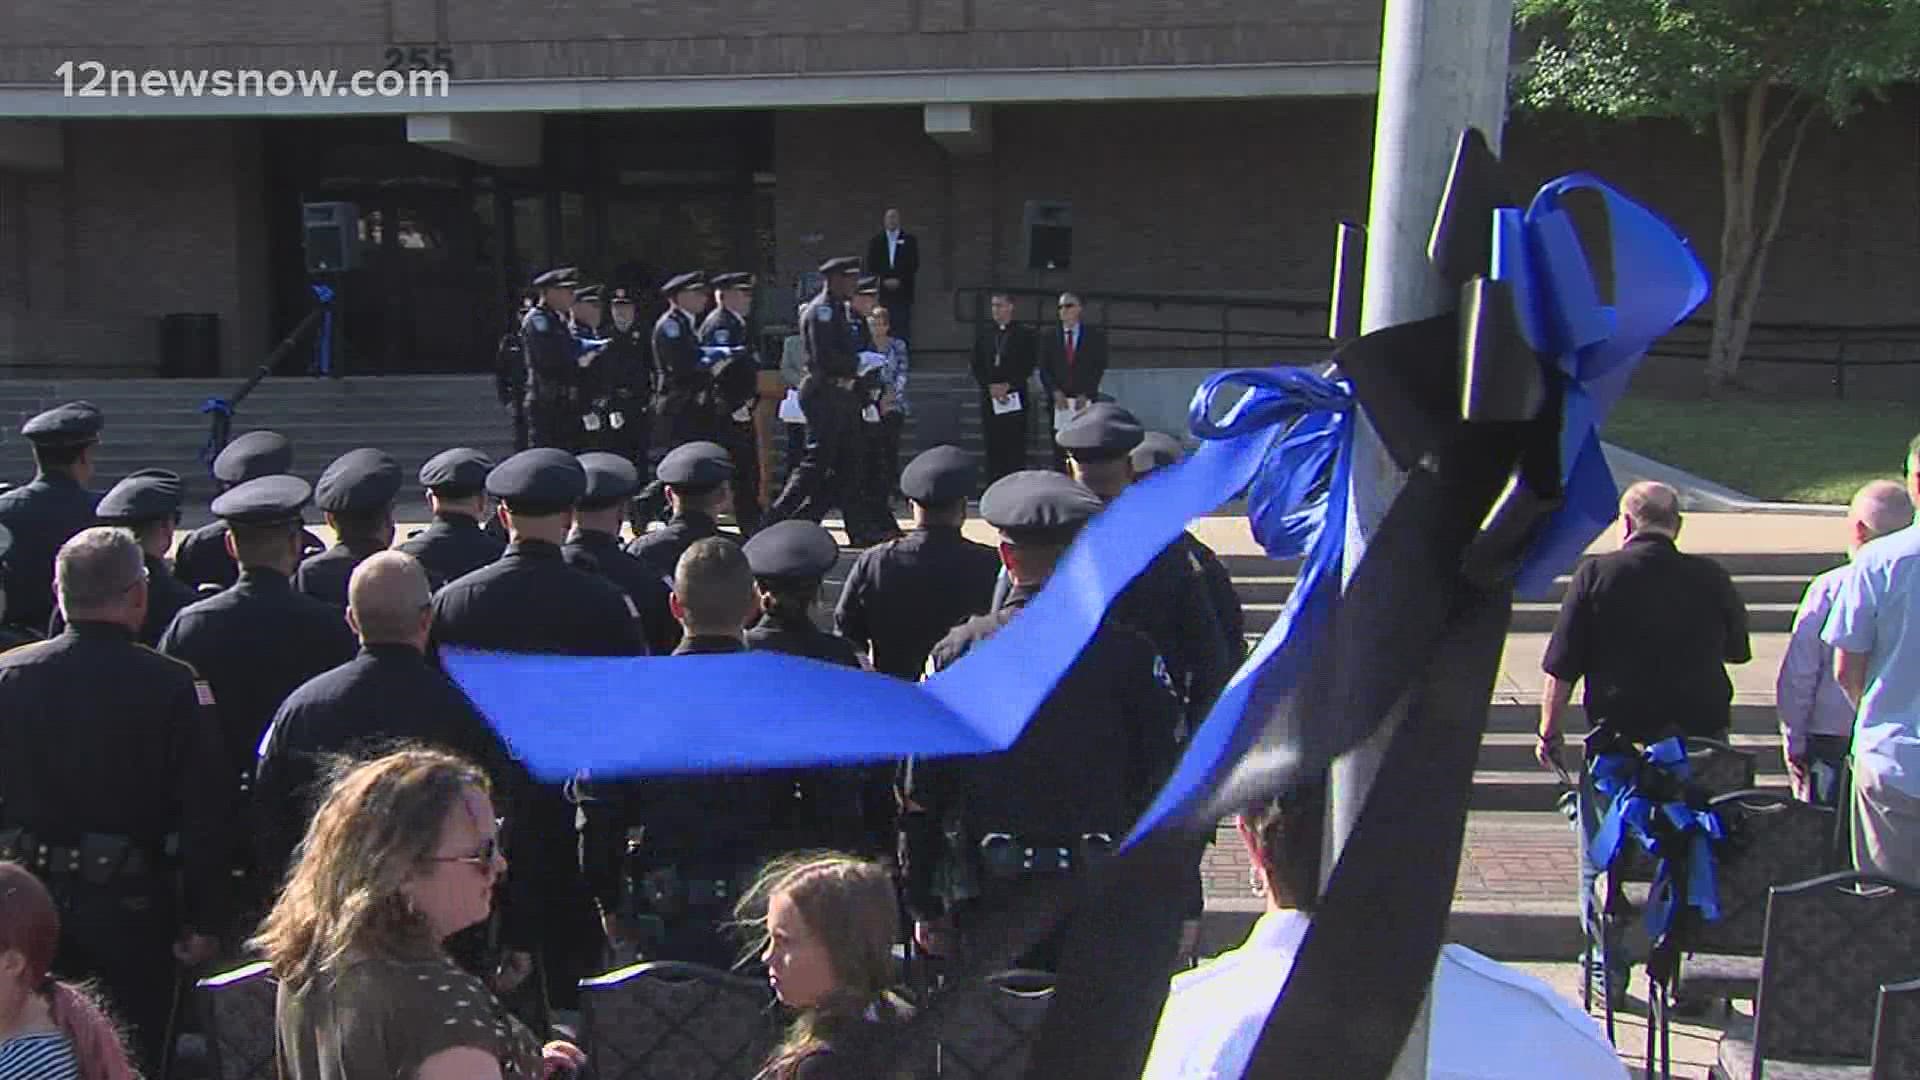 This was the department's annual Fallen Officer ceremony.